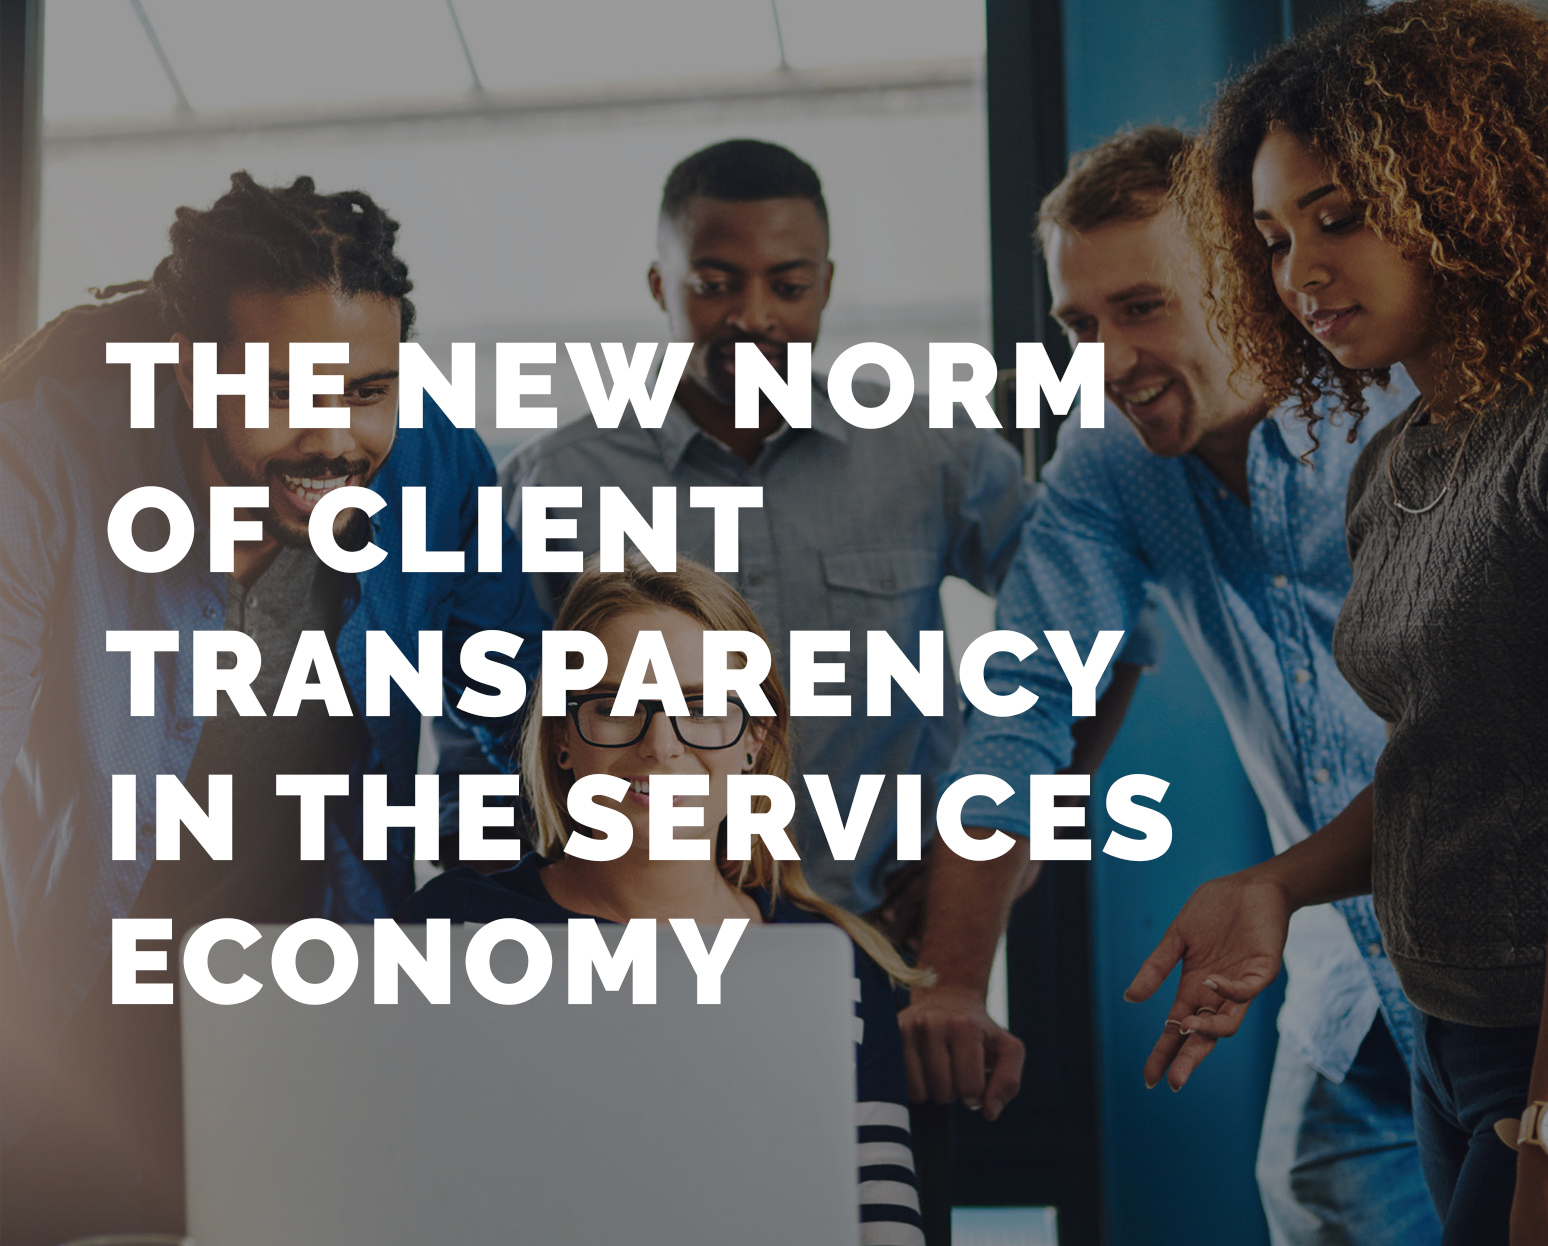 The New Norm of Client Transparency in the Services Economy